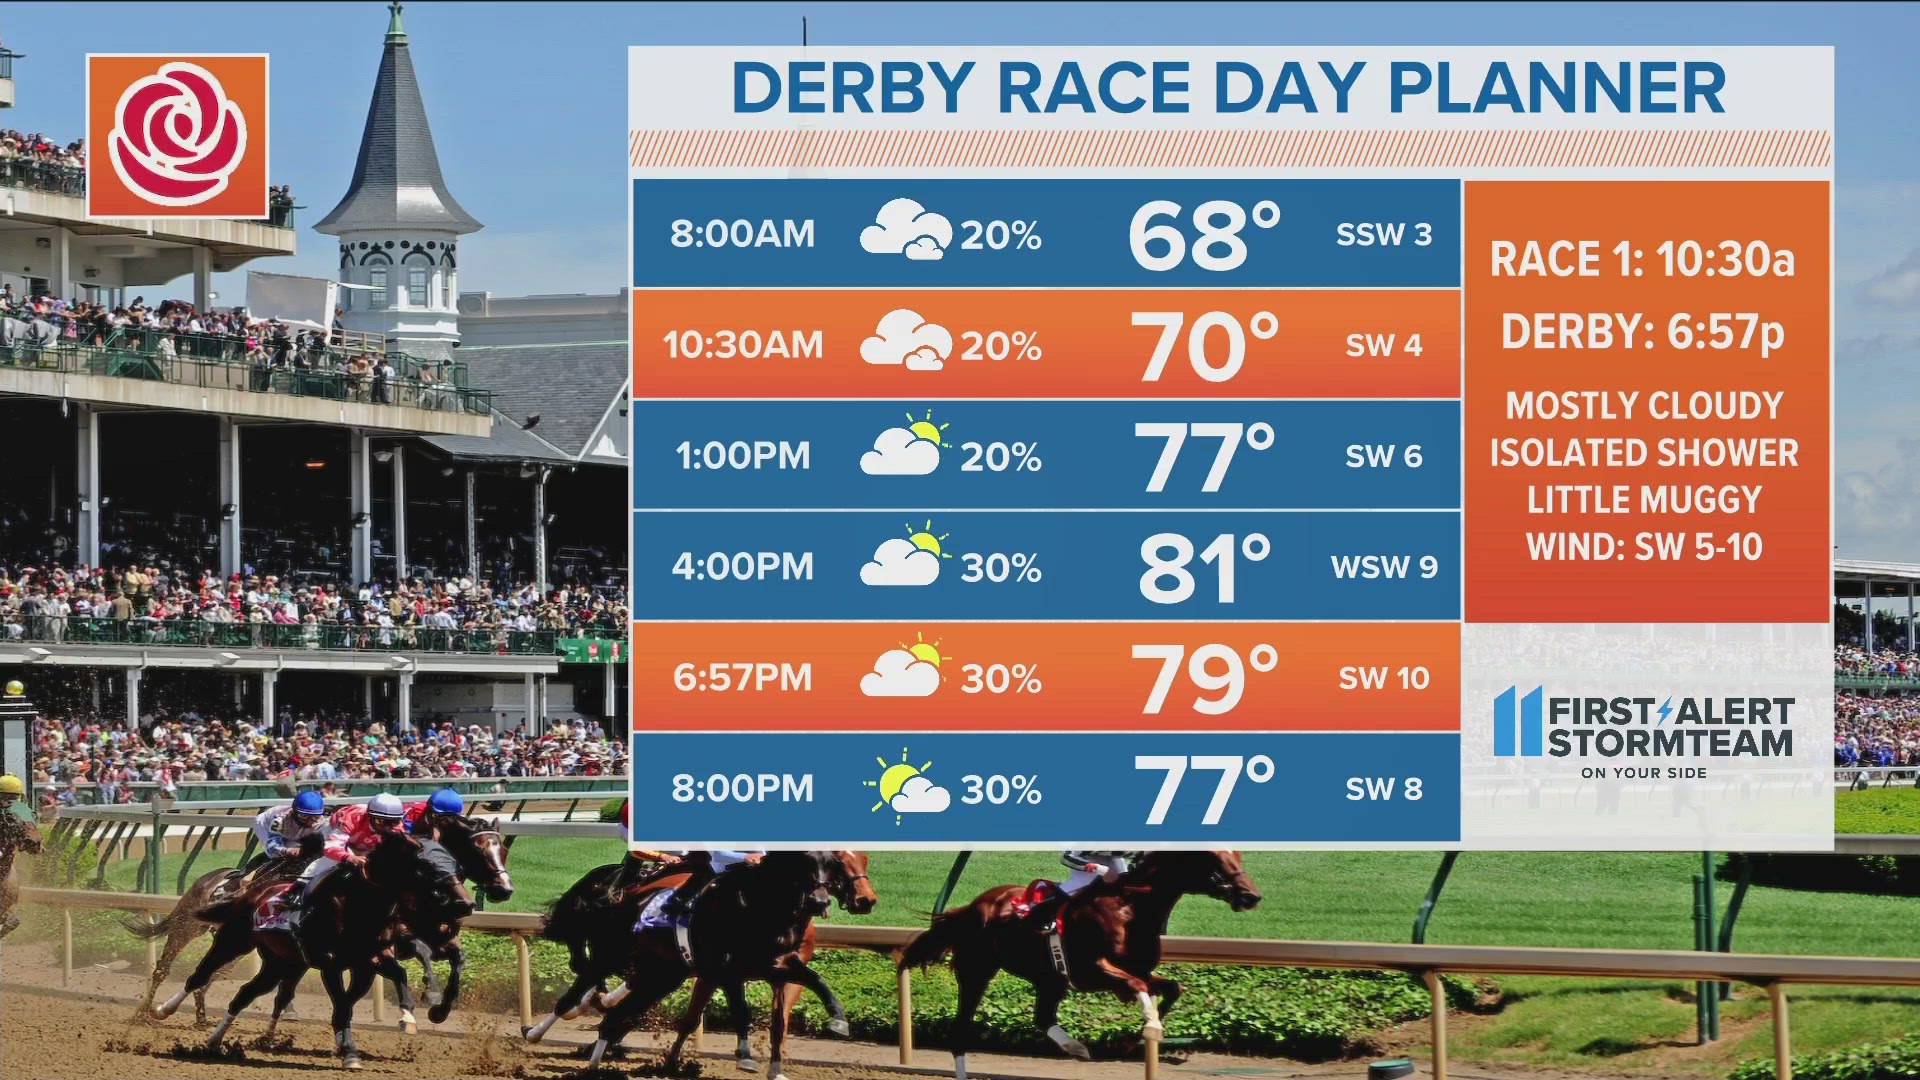 Warm, a bit humid, with an isolated shower possible for our Derby Day Saturday.  Temperatures for the 150th Kentucky Derby will top out in the lower 80s.